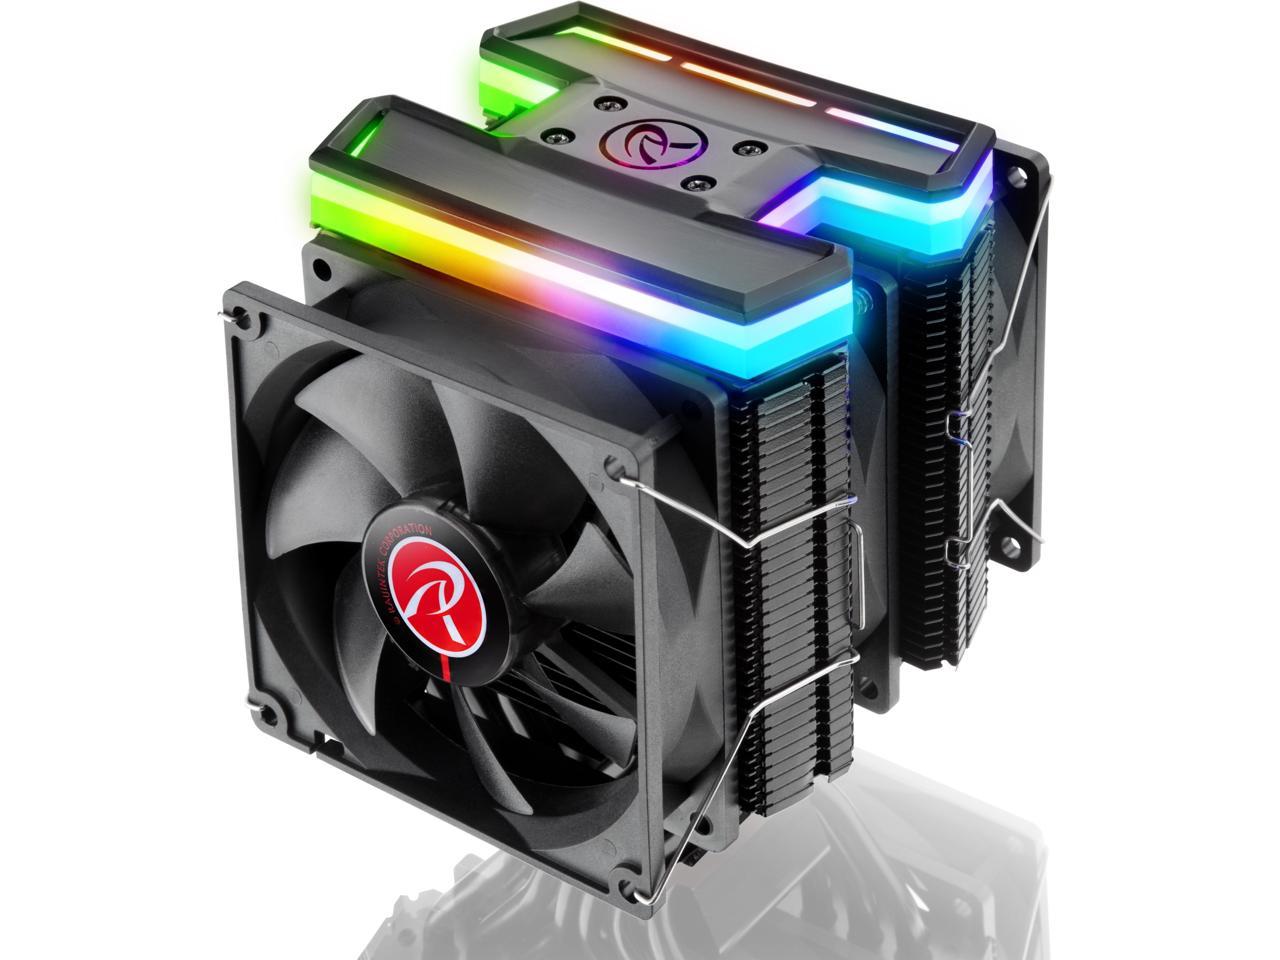 DELOS RBW, a dual tower CPU cooler with Addressable RGB, 6*6mm performing heat-pipe, 3pcs 9225 PWM fans, and fully multiple mounting kit, DELOS RBW is your best choice of stylish cooling nowadays.